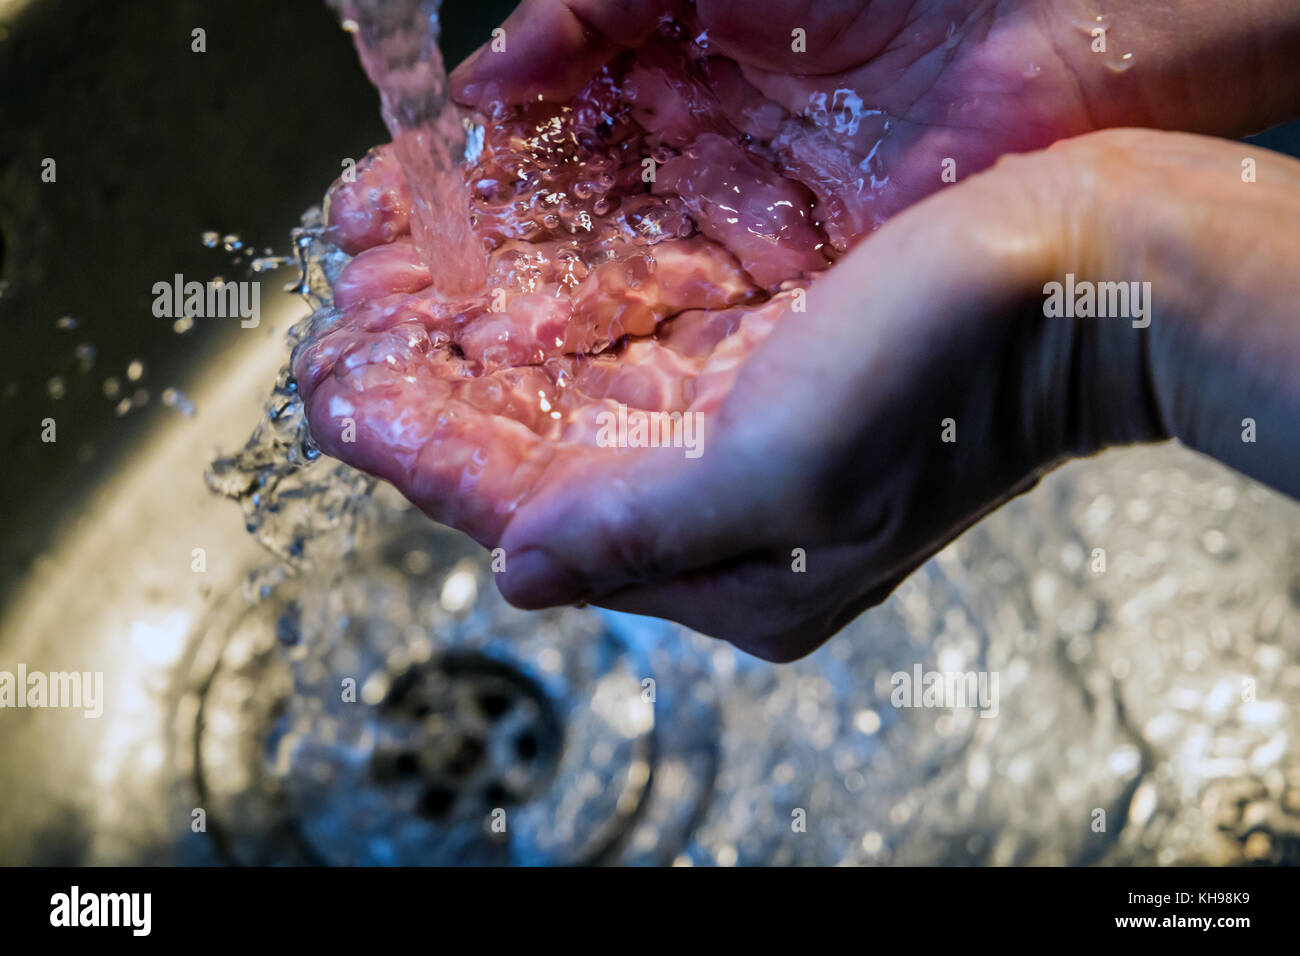 Close up of Woman washing hands in a kitchen basin (Sink) Stock Photo